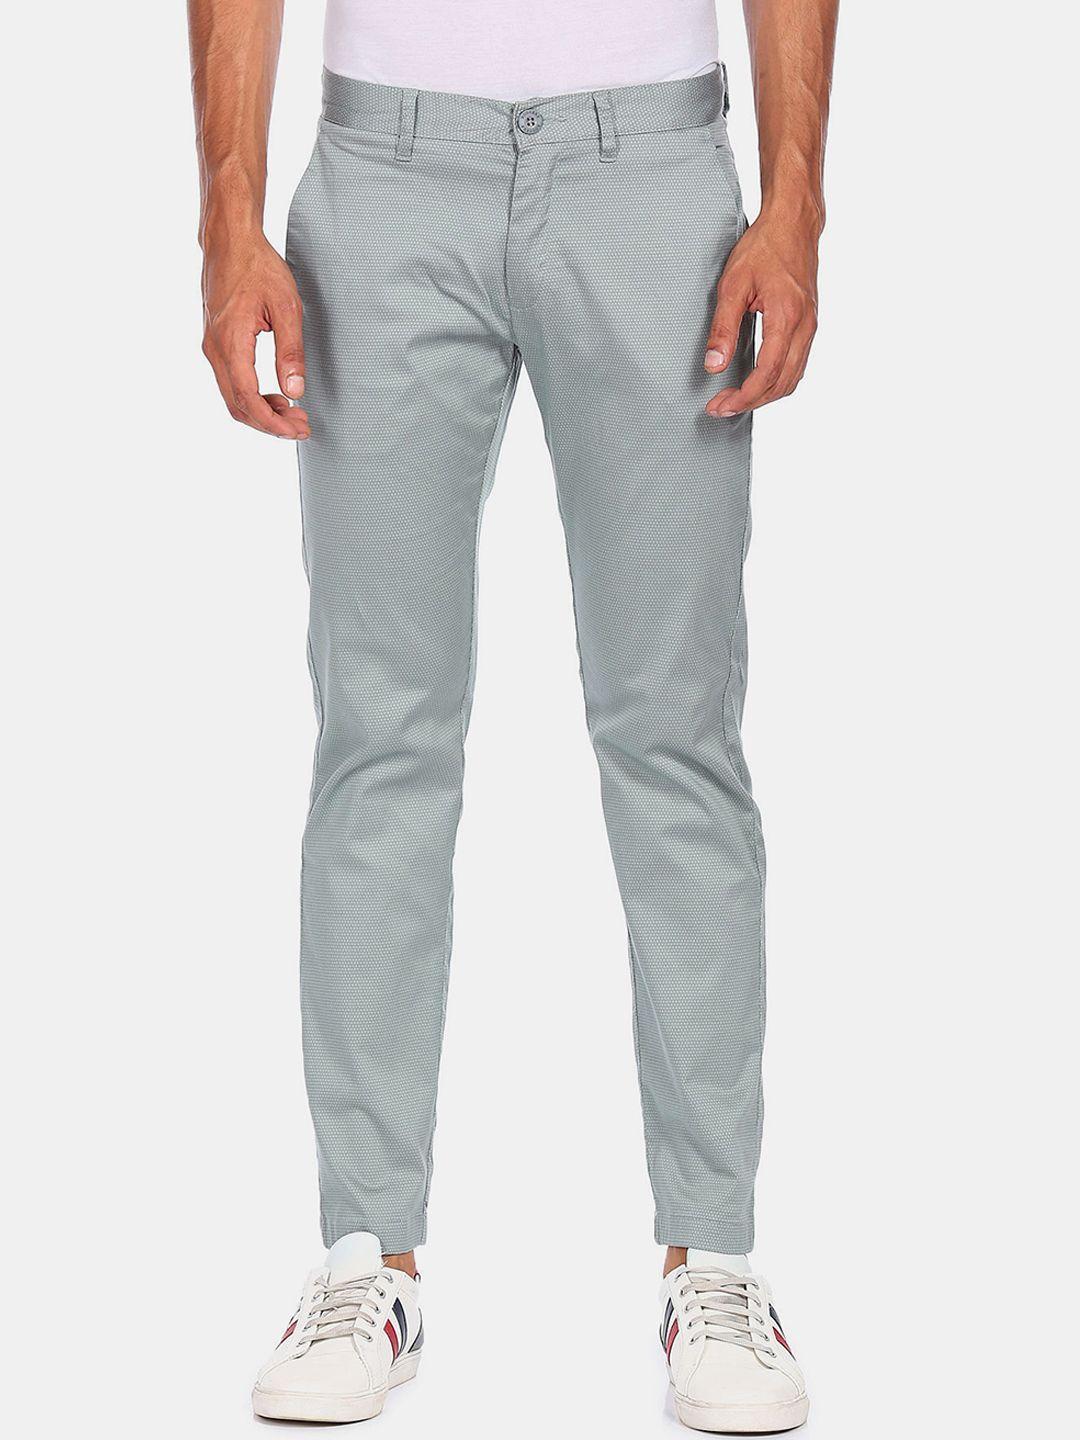 ruggers men grey printed cotton chinos trousers